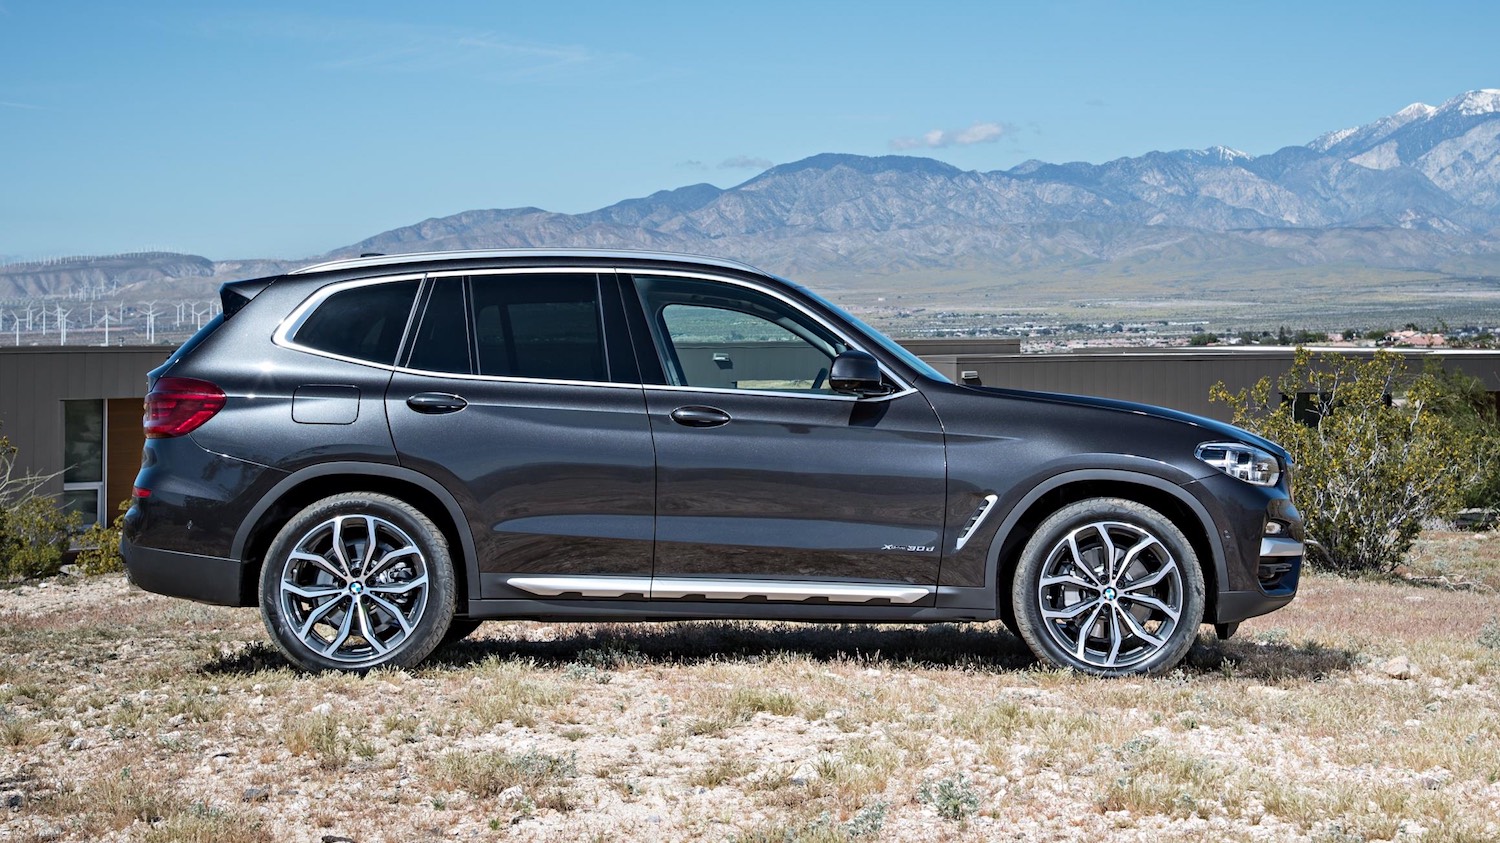 Neil Lyndon takes a spin in the latest BMW X3 M-Sport 7